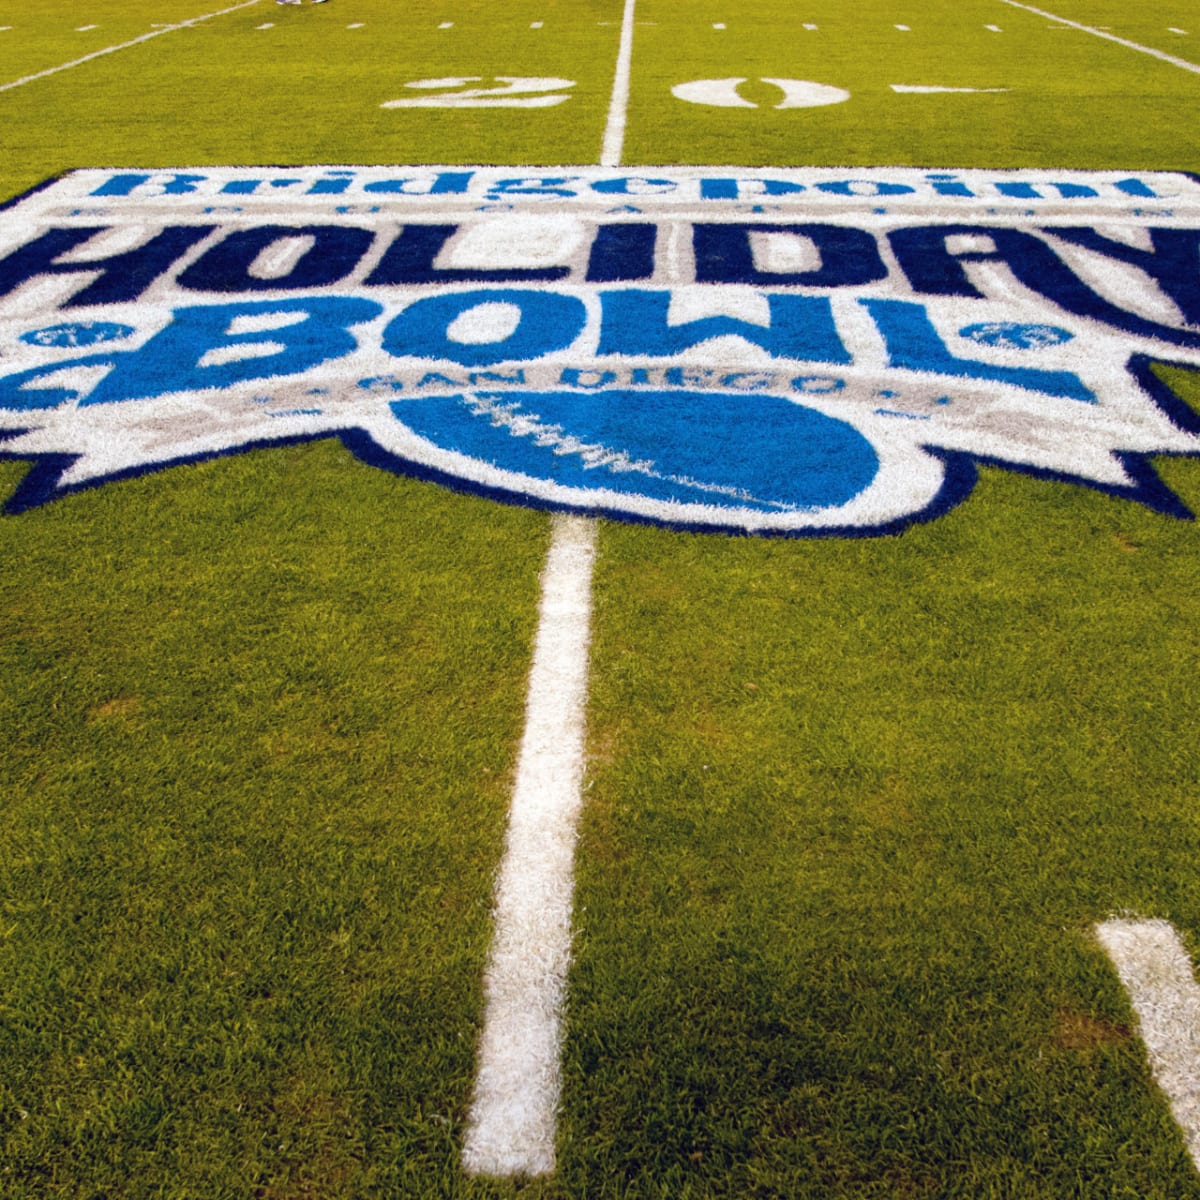 There Are 4 College Football Bowl Games Today - Heres The Schedule